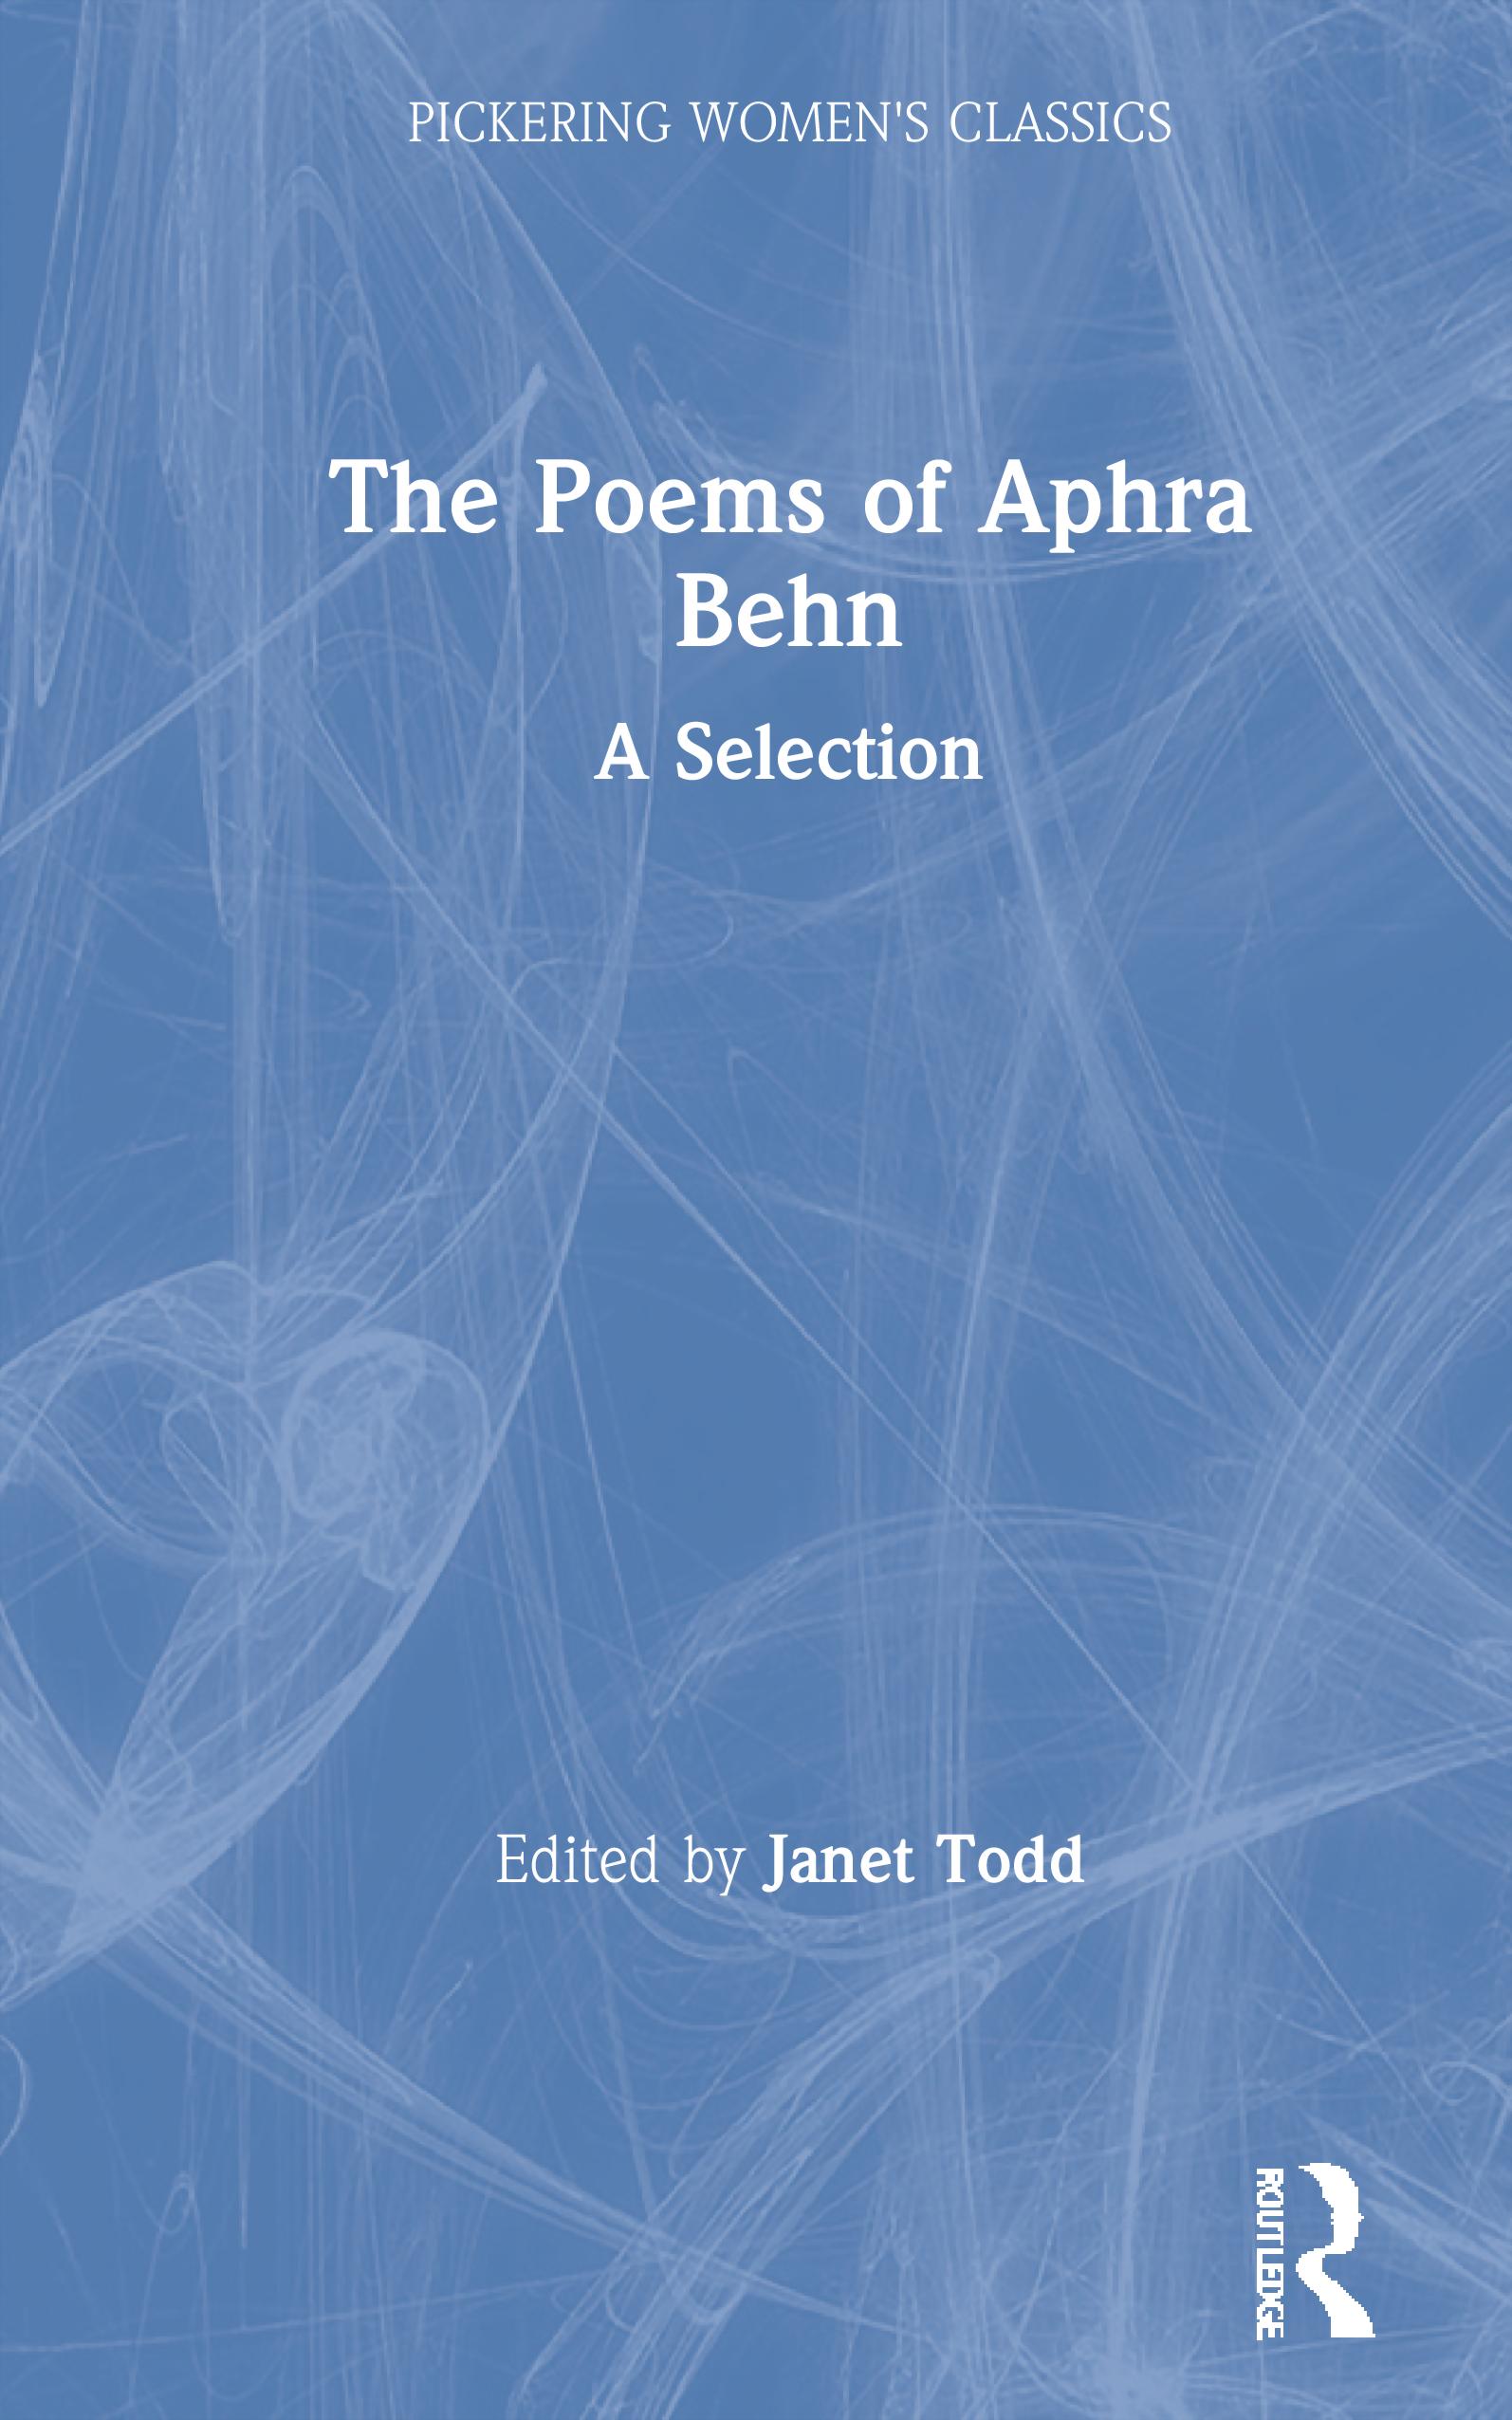 The Poems of Aphra Behn - Janet Todd